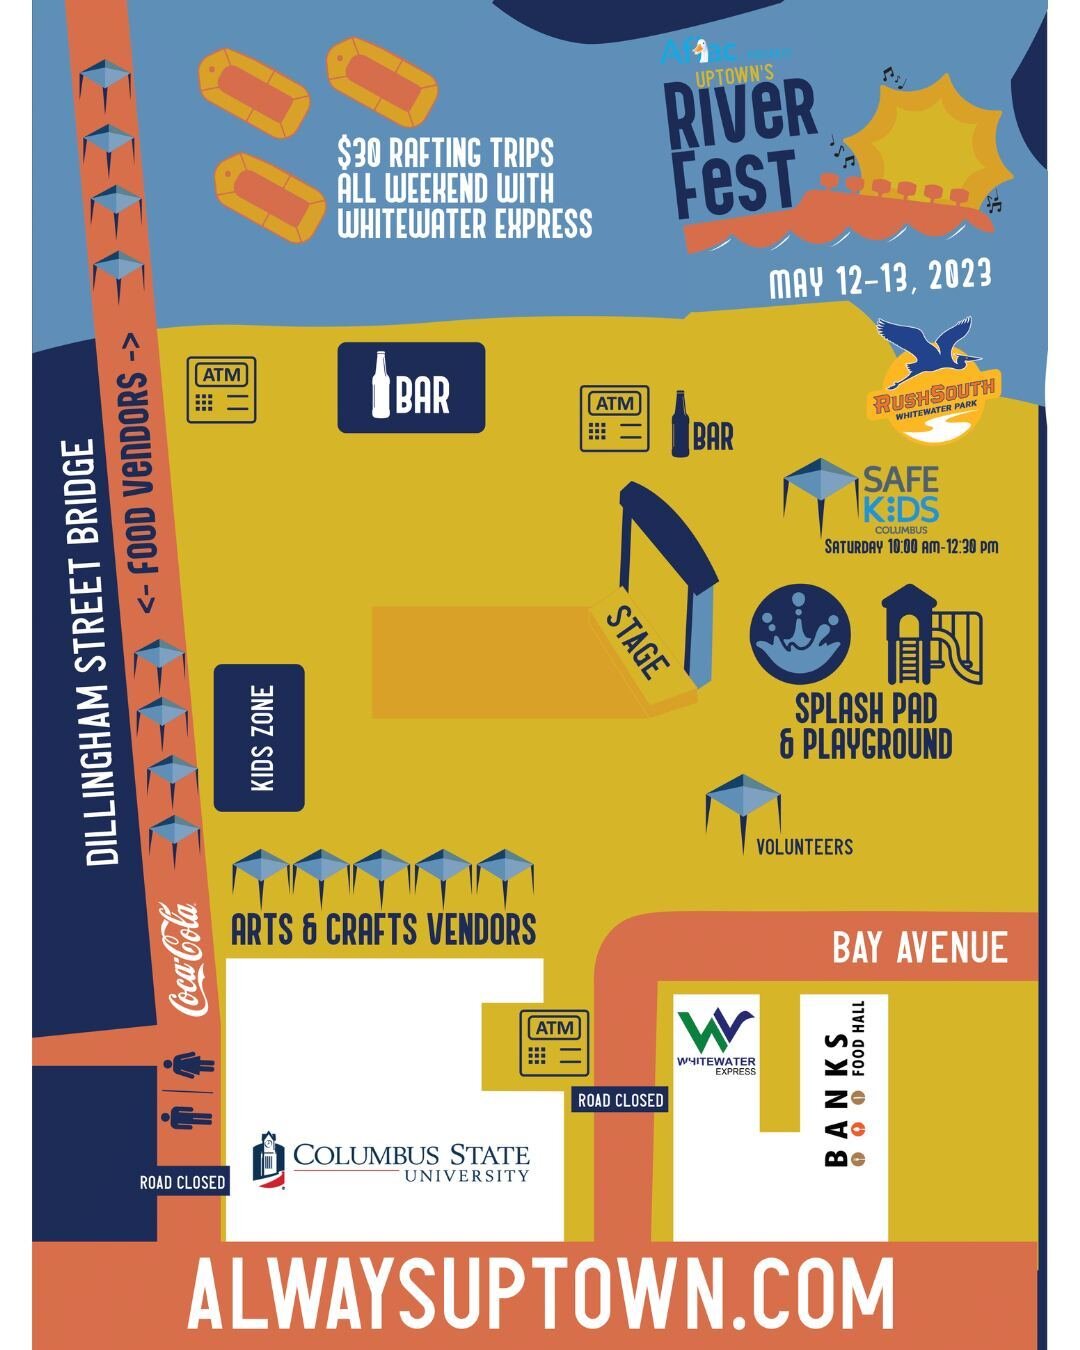 TOMORROW IS THE BIG DAY- RIVERFEST 2023!! Here is an event map to help you plan your day, plan your routes and have the best weekend hanging out with us! For more information, visit our website at our #linkinbio! 🤩

#alwaysuptown #amazingcolumbusga 